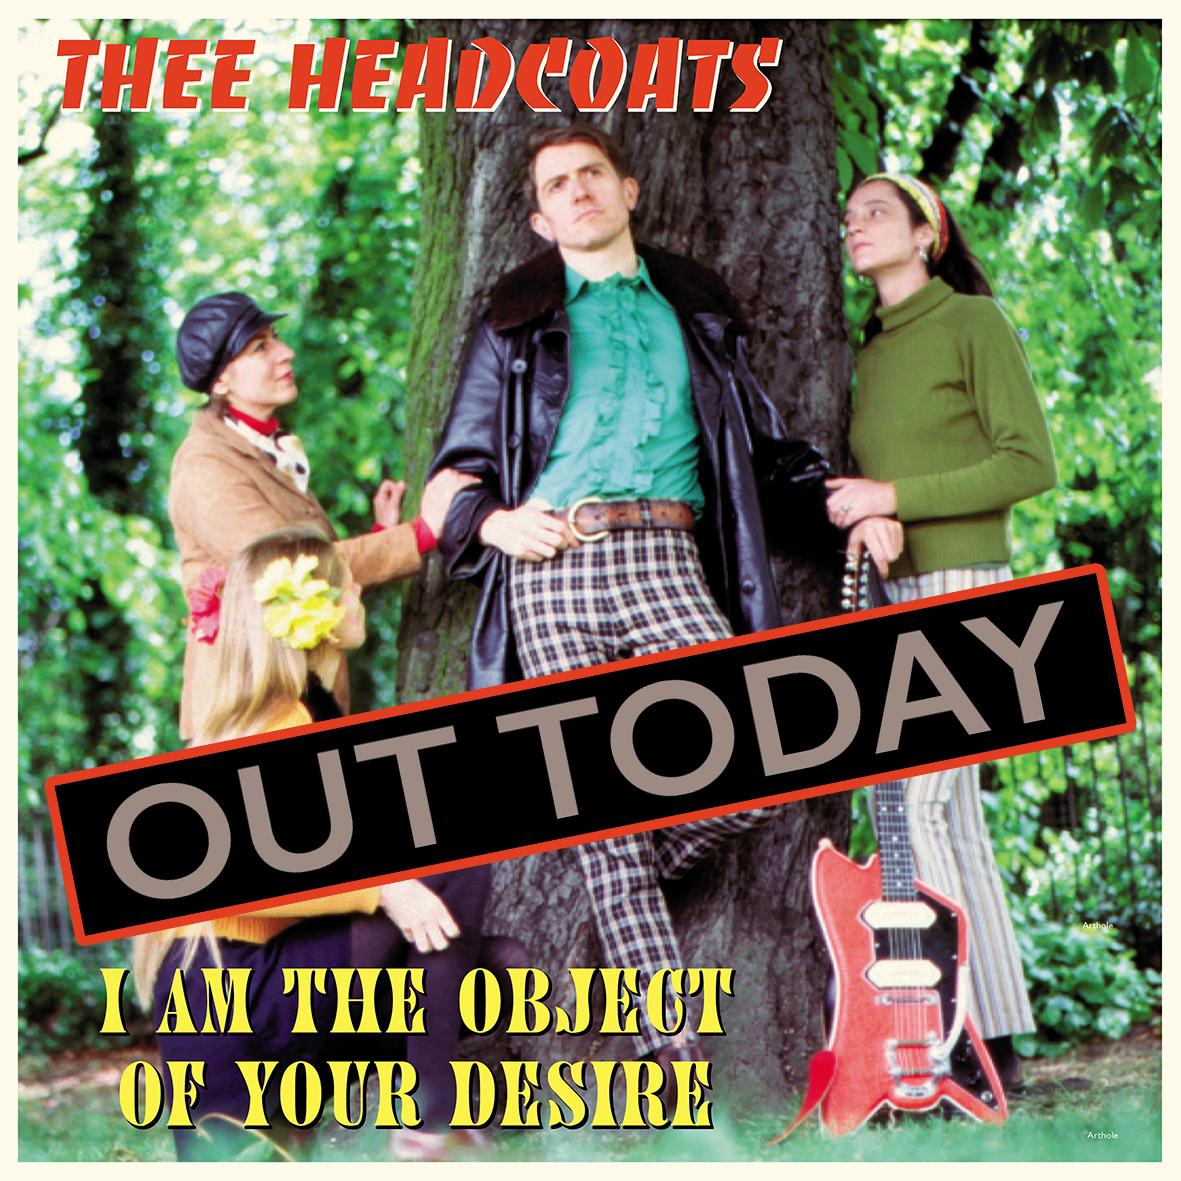 OUT TODAY ON BLACK VINYL LP!! Thee Headcoats - I Am The Object Of Your Desire (LP) damagedgoods.greedbag.com/buy/thee-headc… REISSUE OF THEE HEADCOATS’ FINAL ALBUM IN THEIR ORIGINAL INCARNATION! Originally released by Friends Of The Buff Medway Fanciers Association Records in 2000!